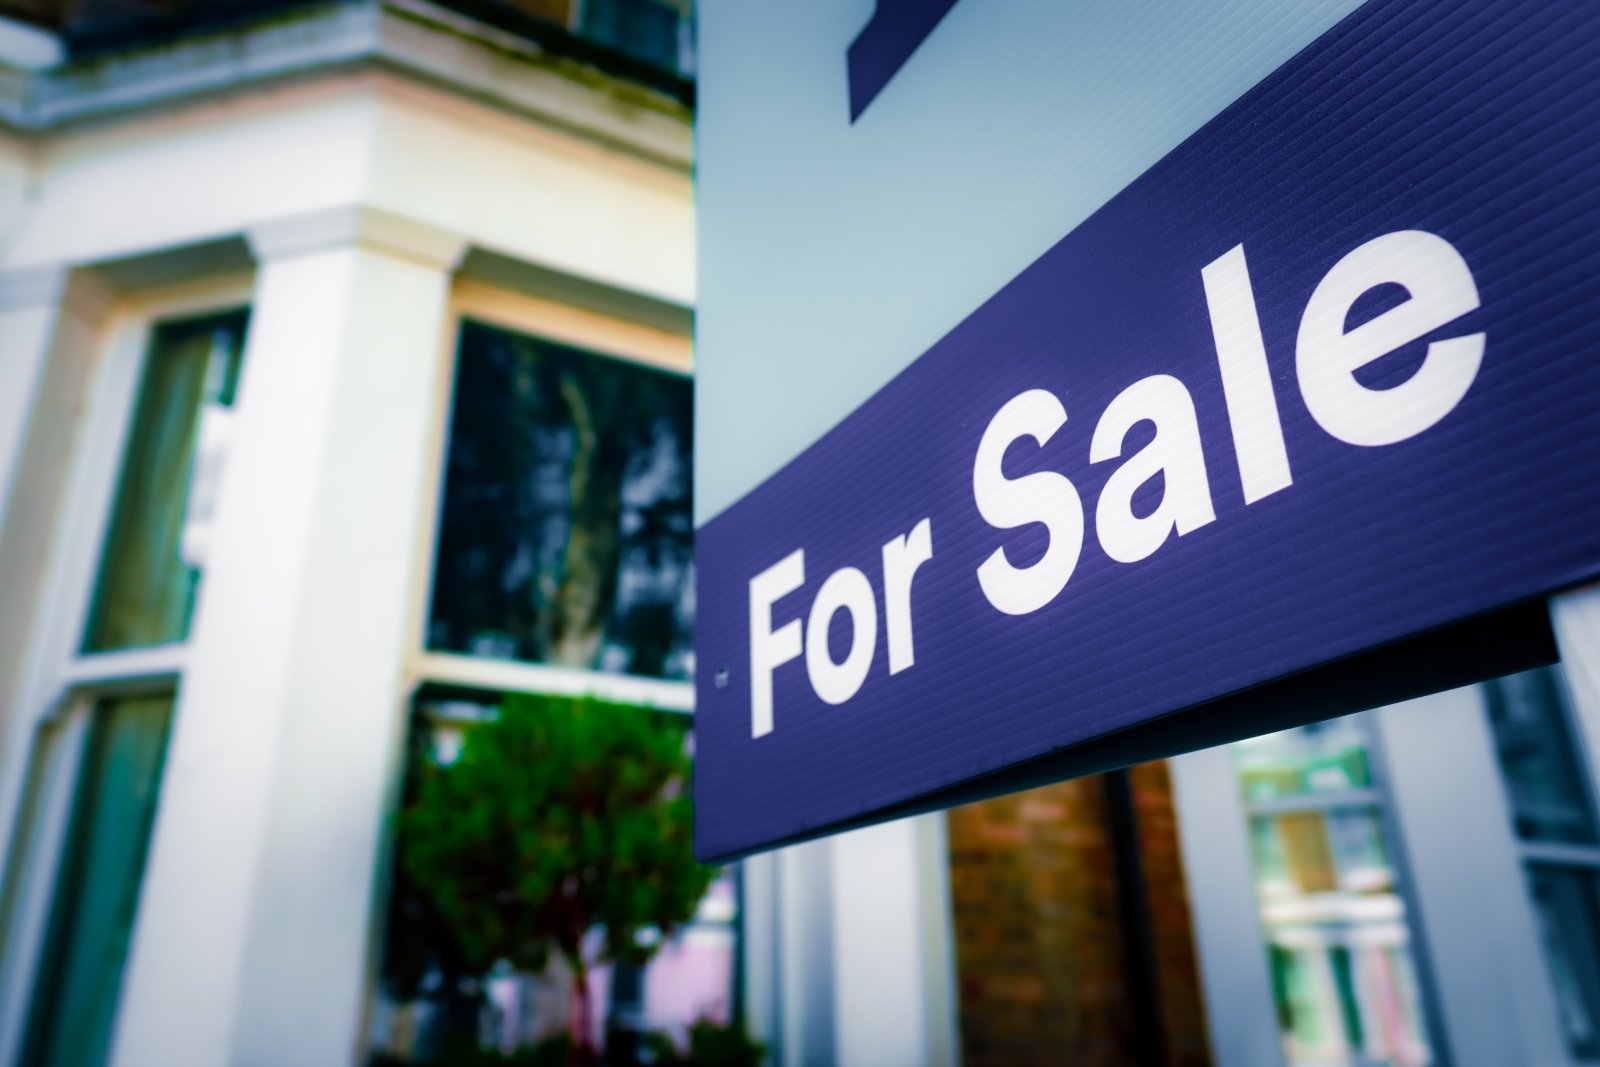 Where to buy Investment Property in the UK